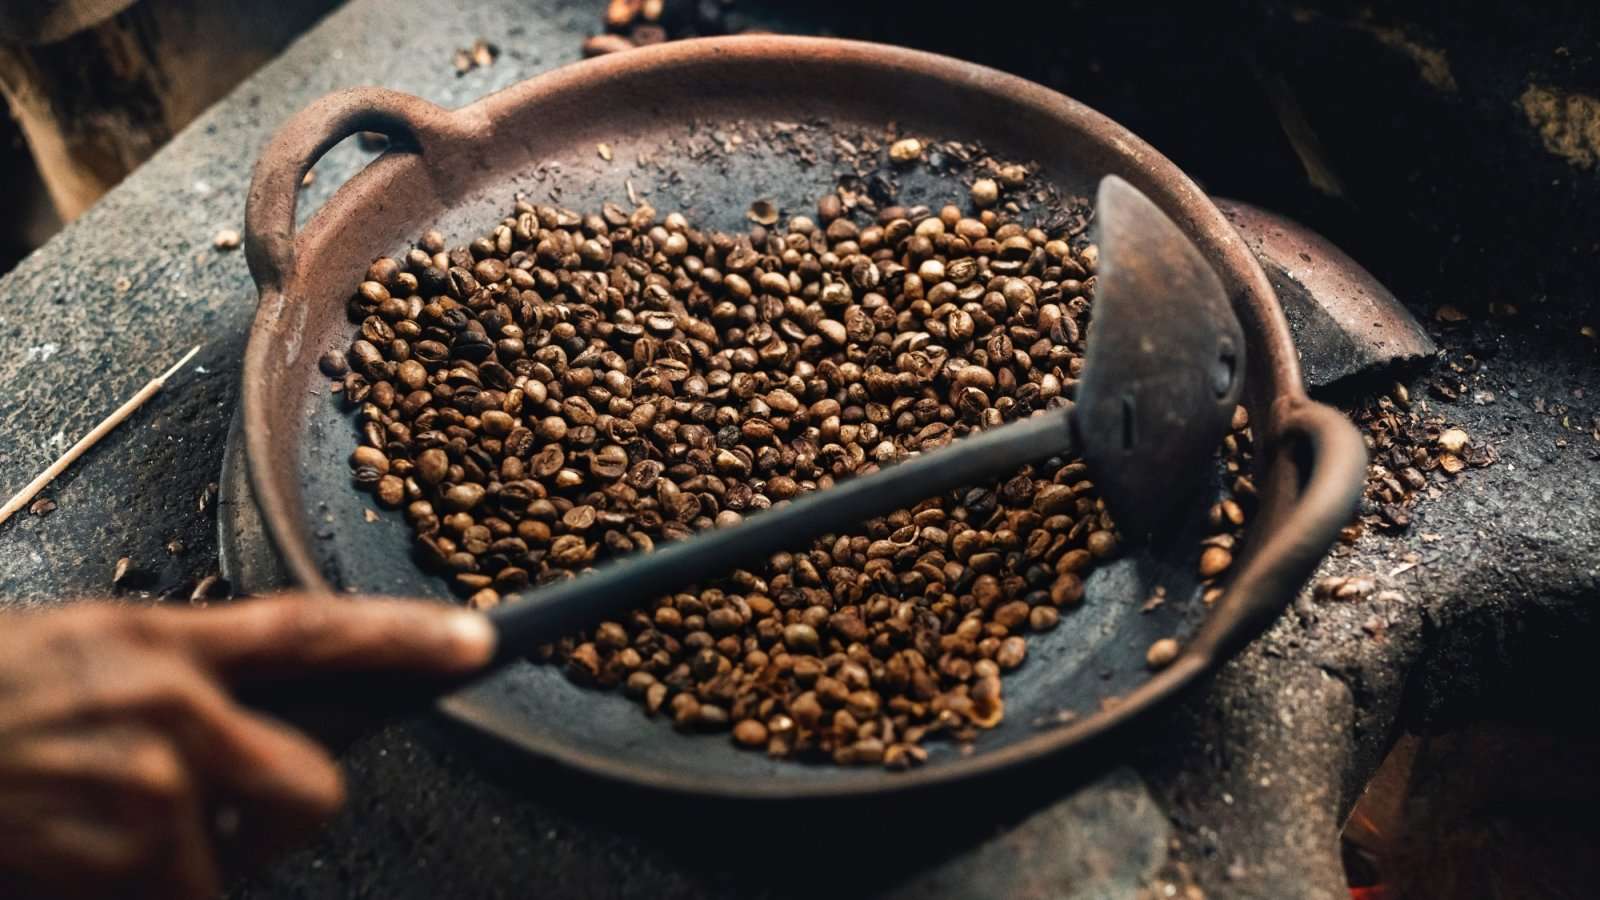 Why Are Coffee Beans Roasted?